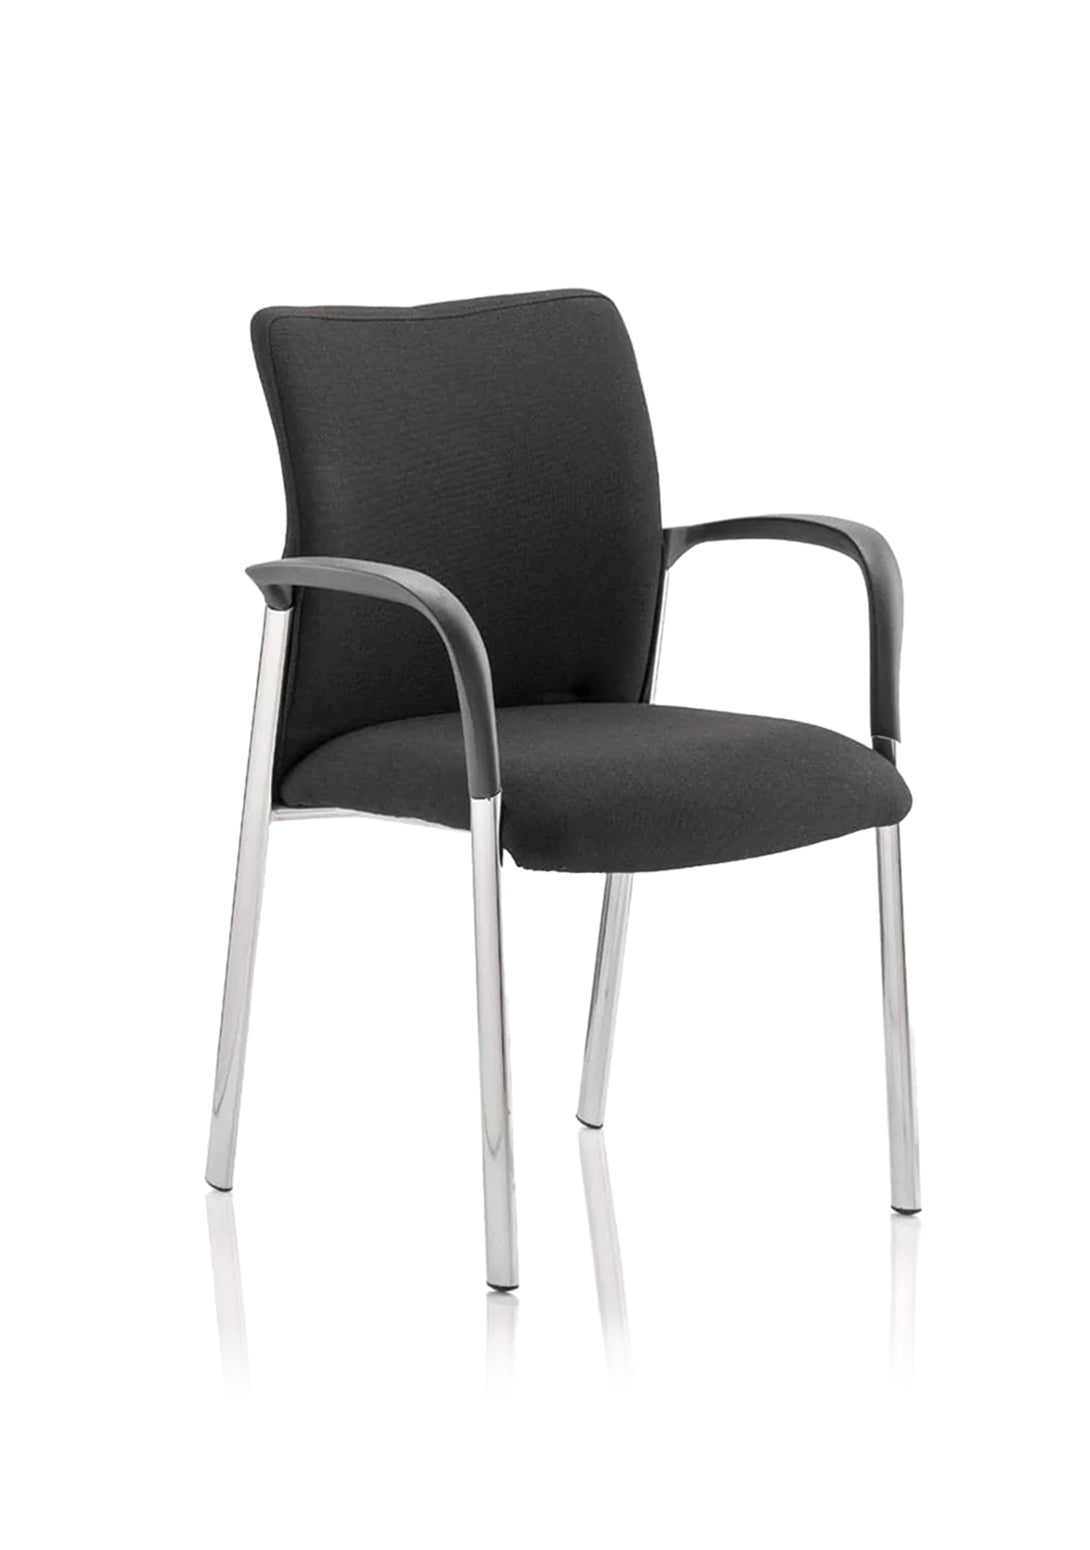 Academy Visitor Chair Black Fabric Back Without Arms 